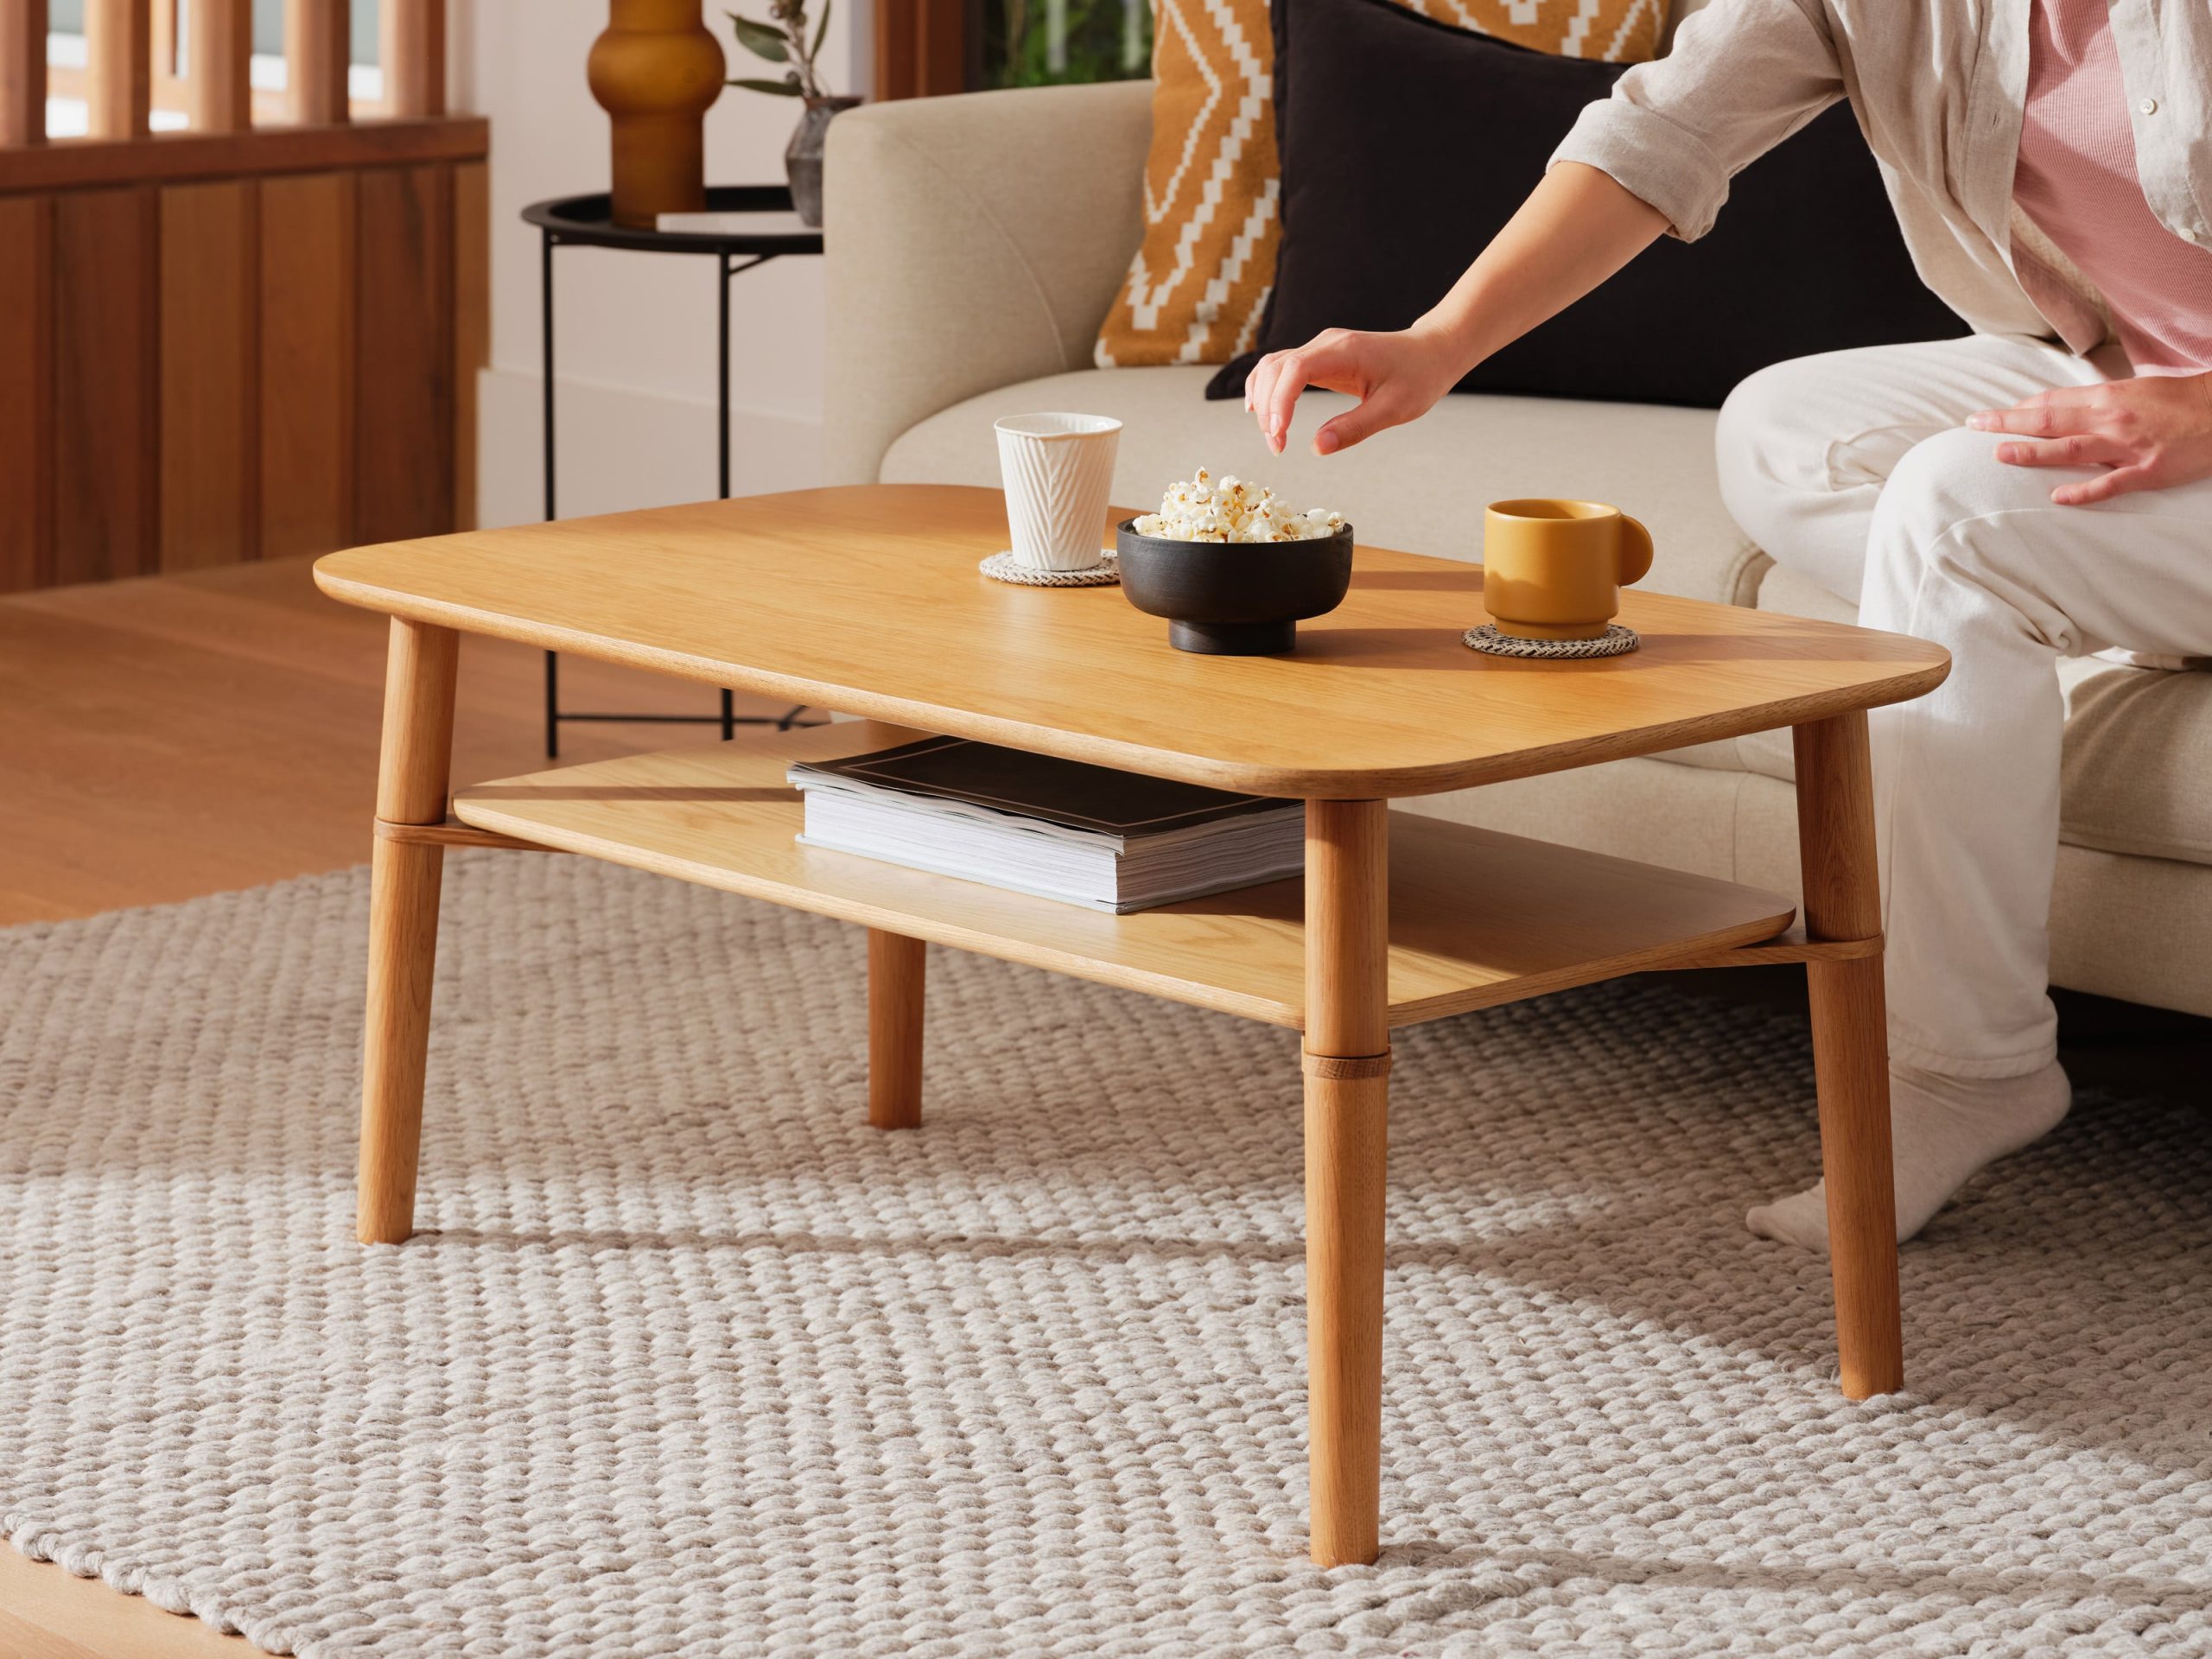 A woman reaches for a bowl of popcorn on her mid-century coffee table in a bright and clean living room